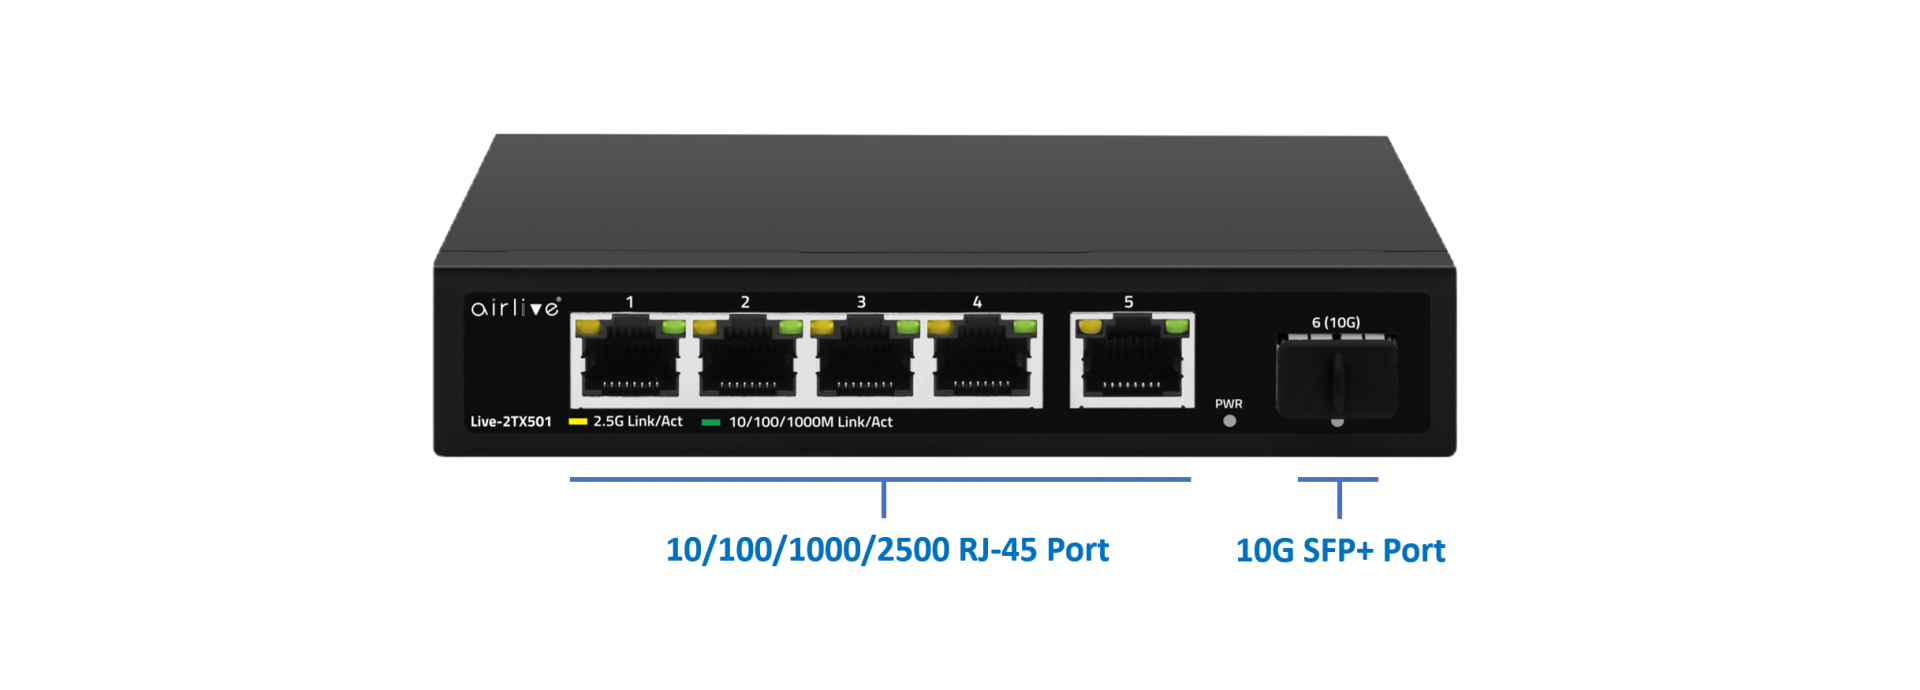 Live-2TX501: 2.5Gbps Base-T Multi Gigabit Switch, Auto-Adaptive_10G, 2.5G  Multi Giga Switch_Multi Gigabit Switch 2.5G & 10G Base-T_Products, wifi6  MESH Router, AirLive, Managed Switch, 5G